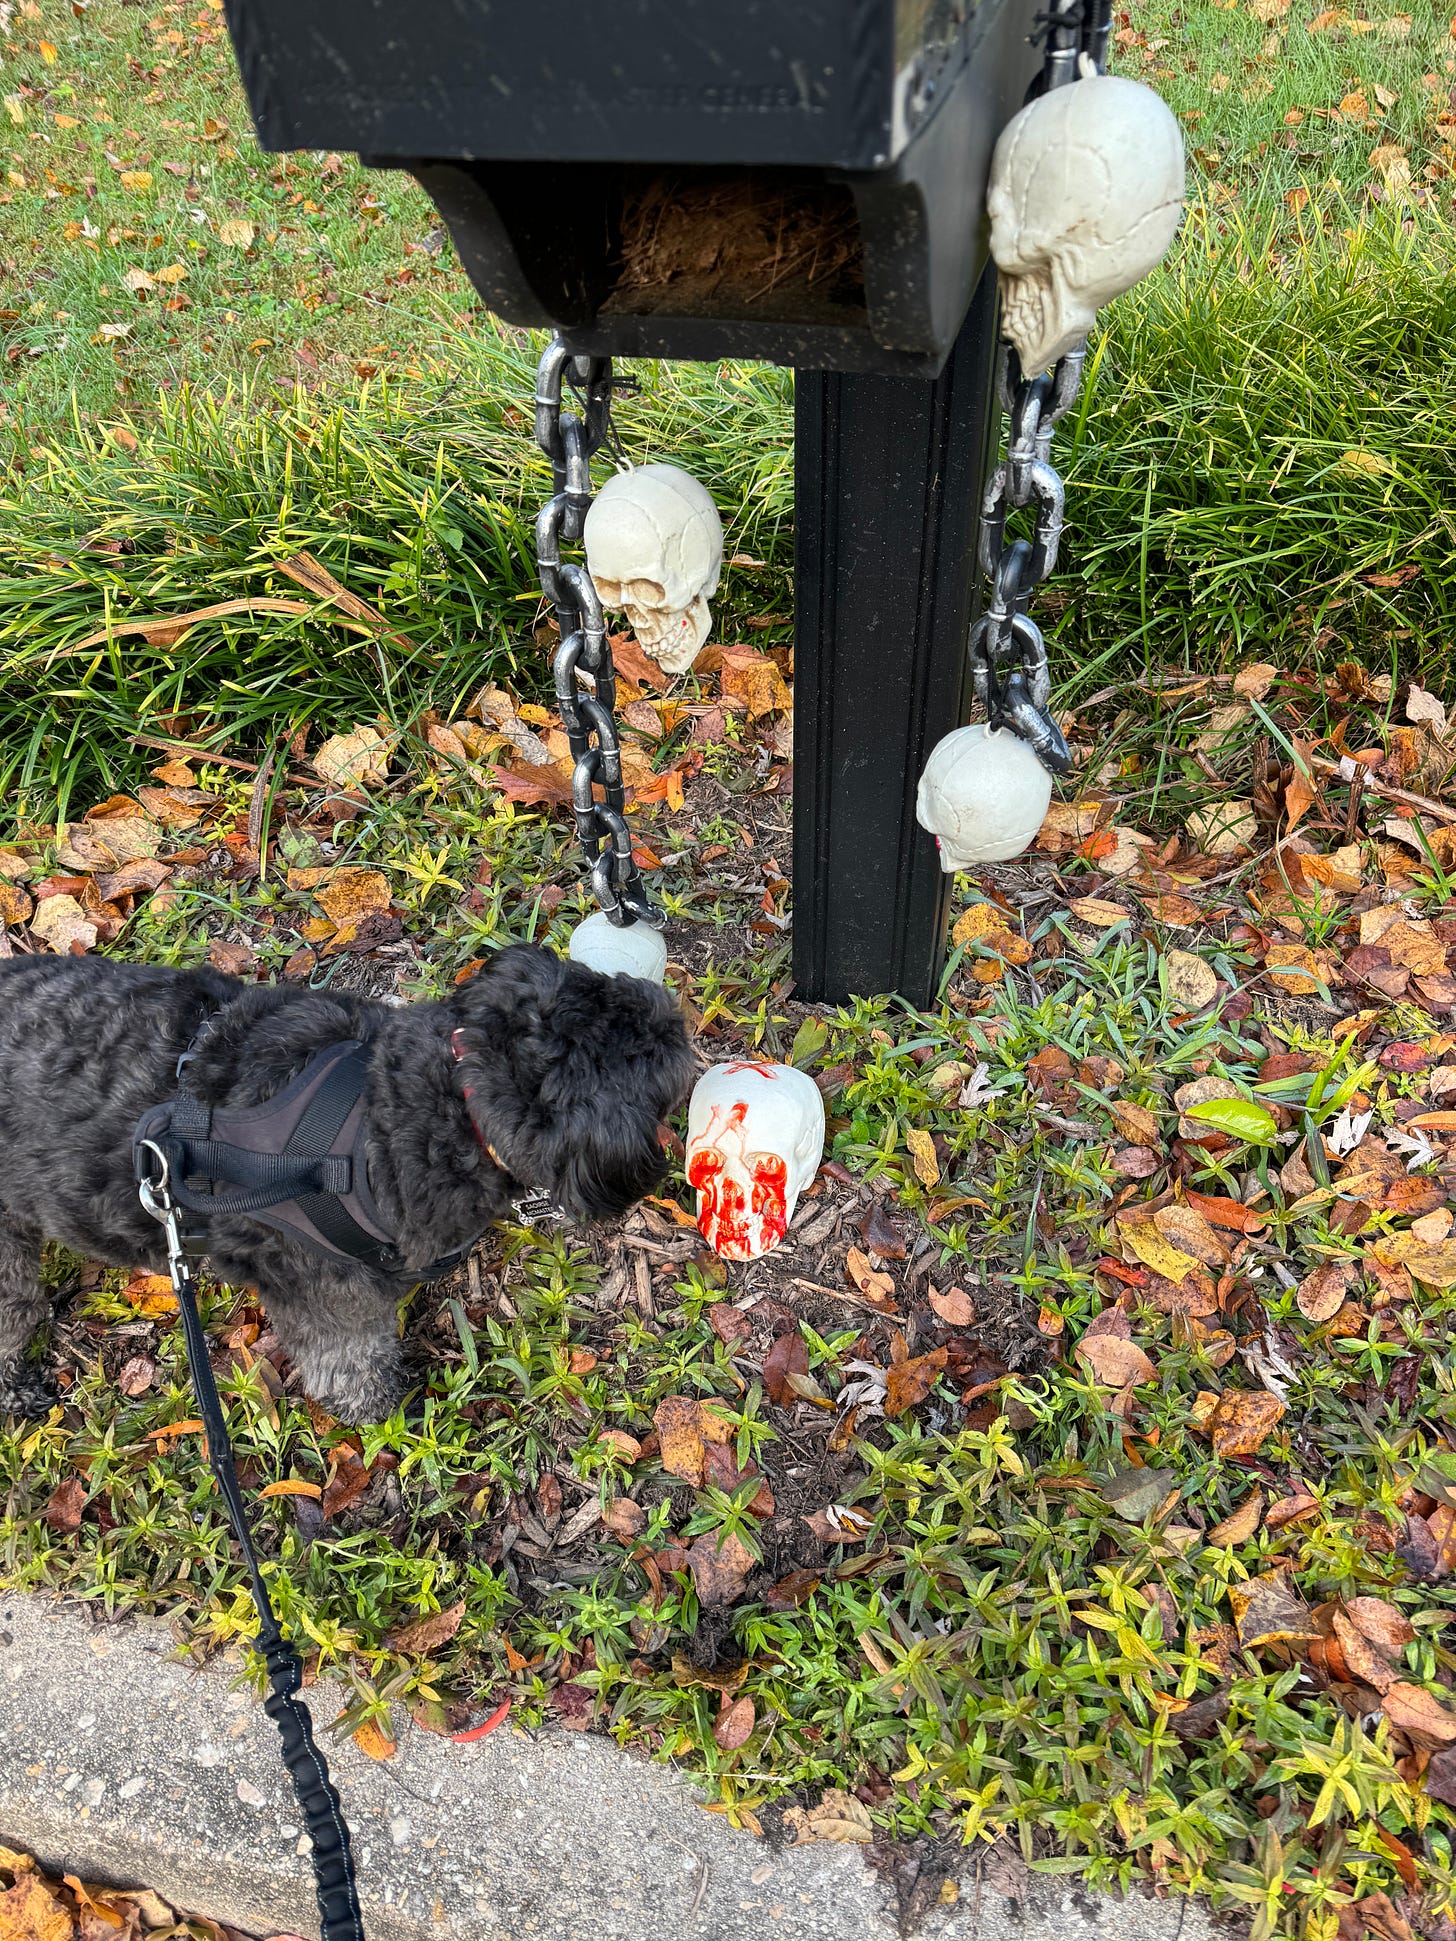 dog curiously sniffing halloween decor (skelatons)